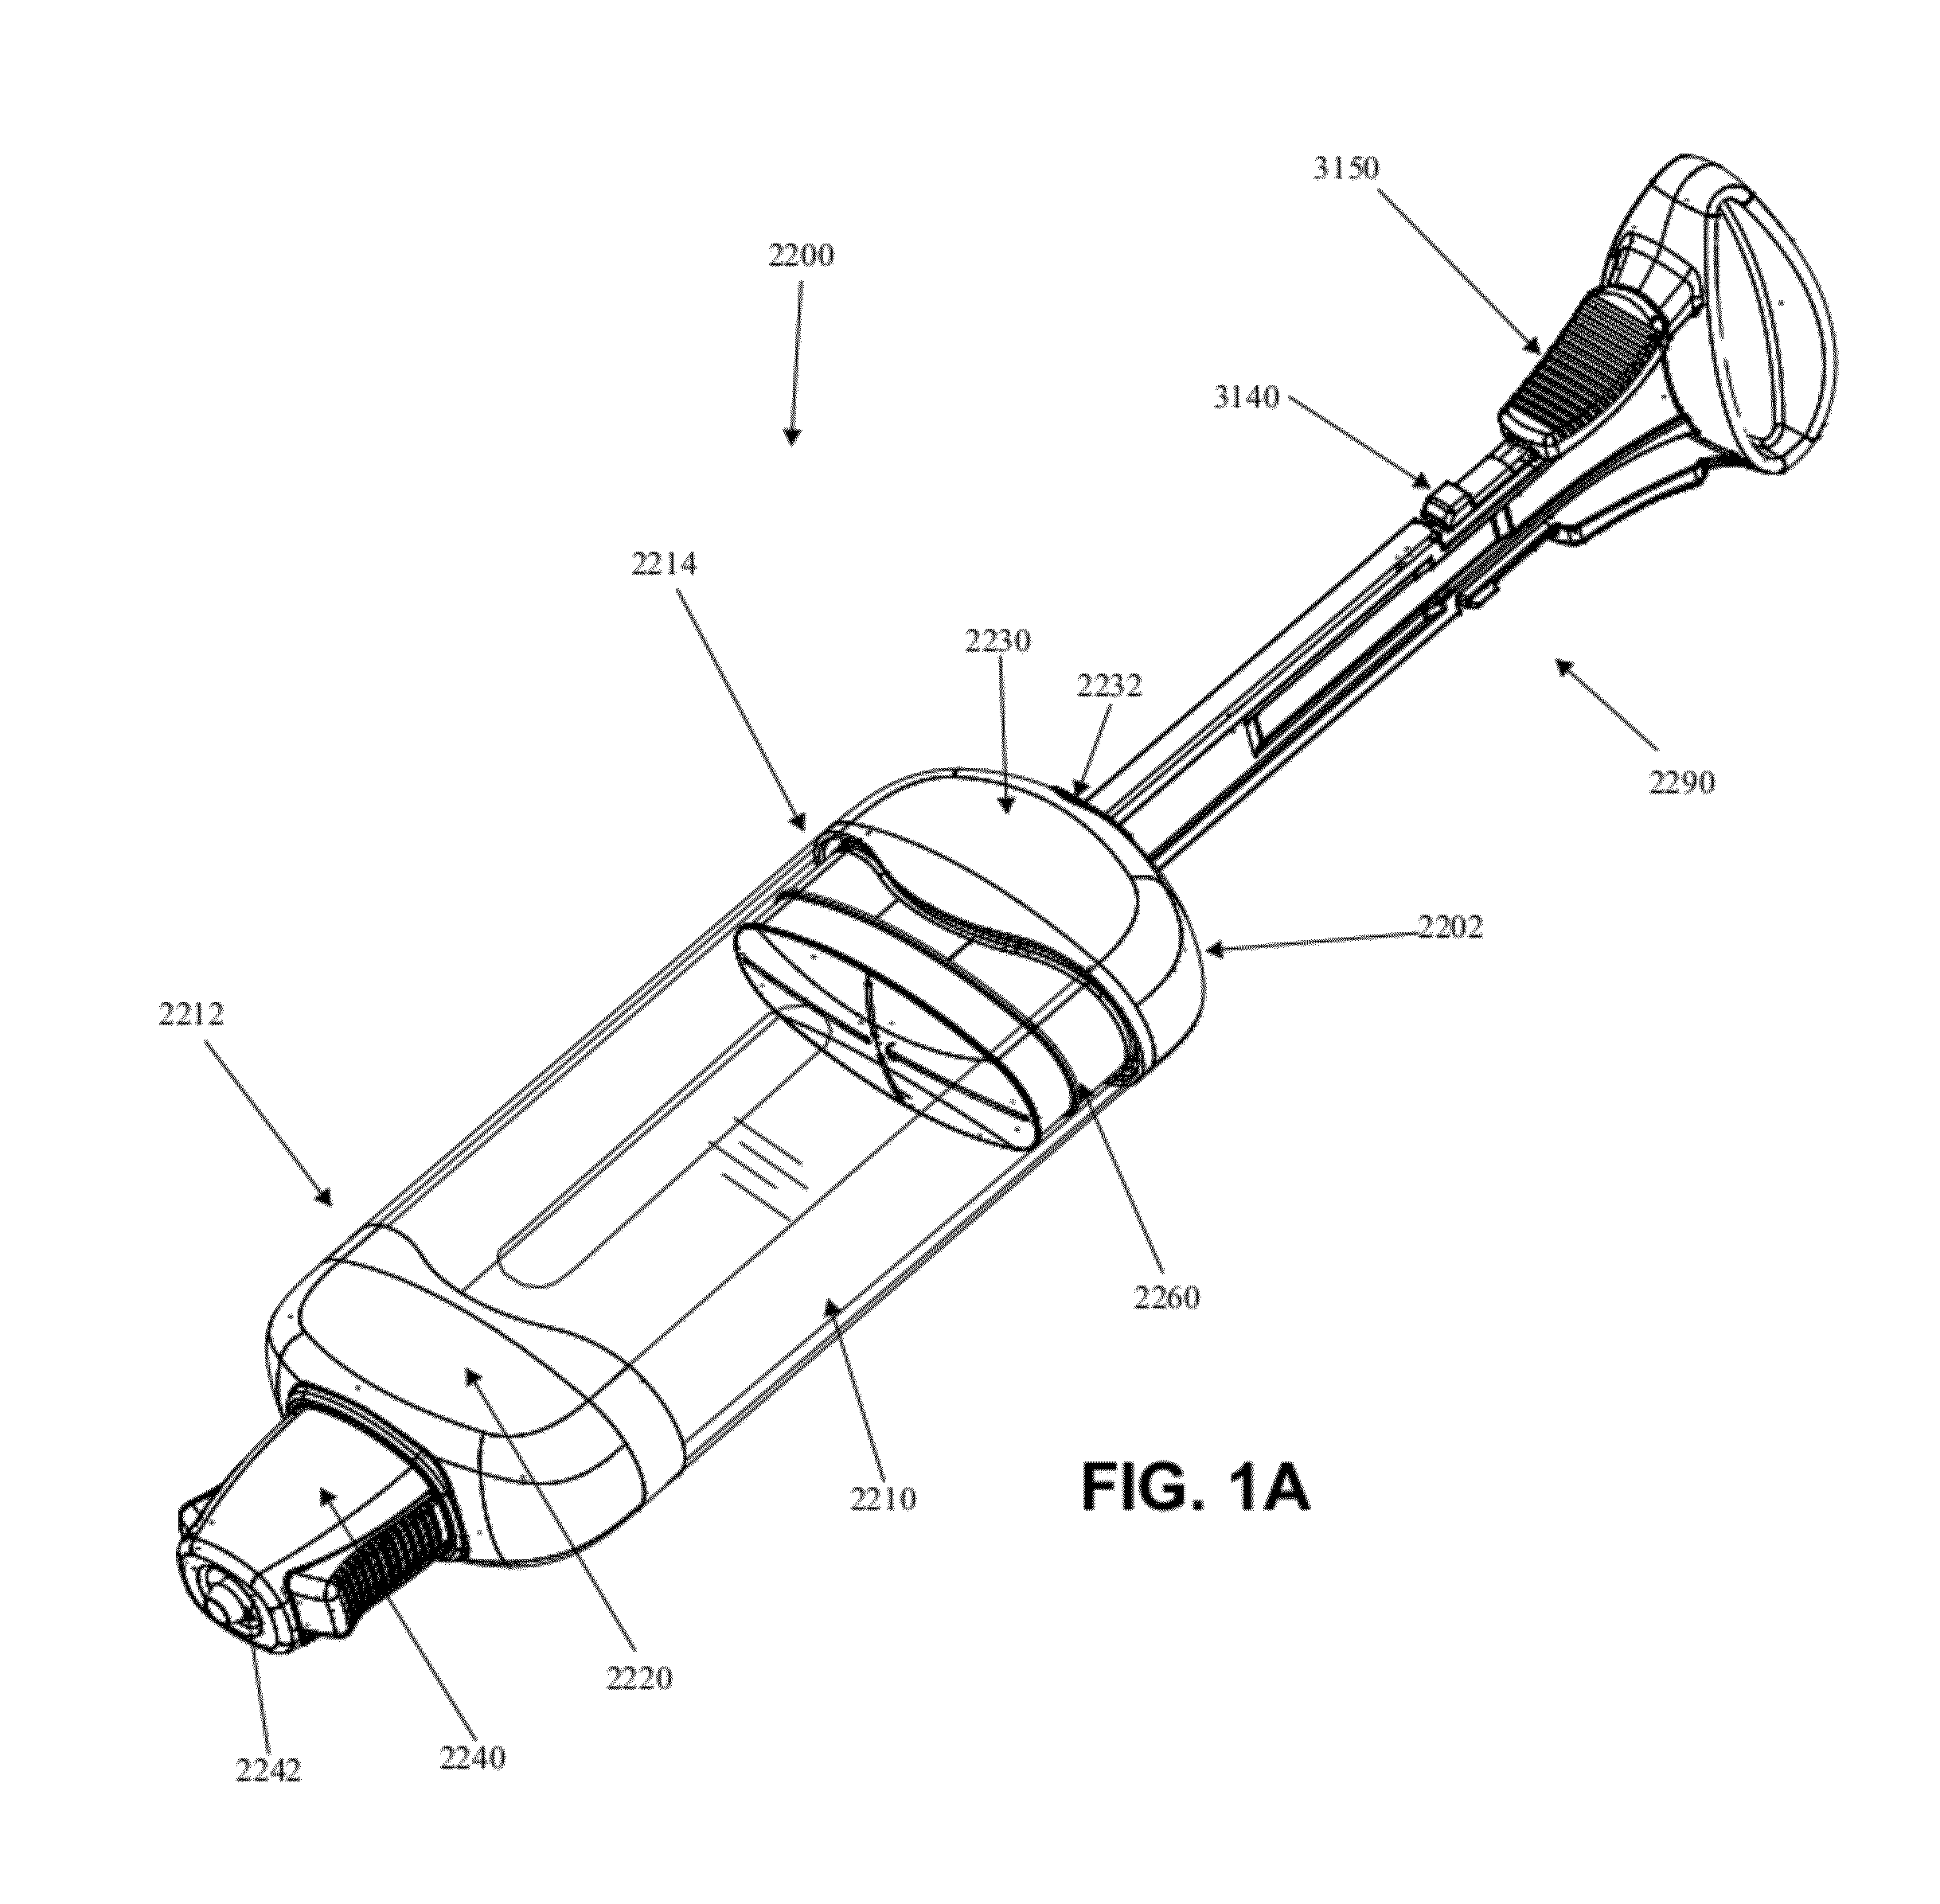 Controlled negative pressure apparatus and alarm mechanism